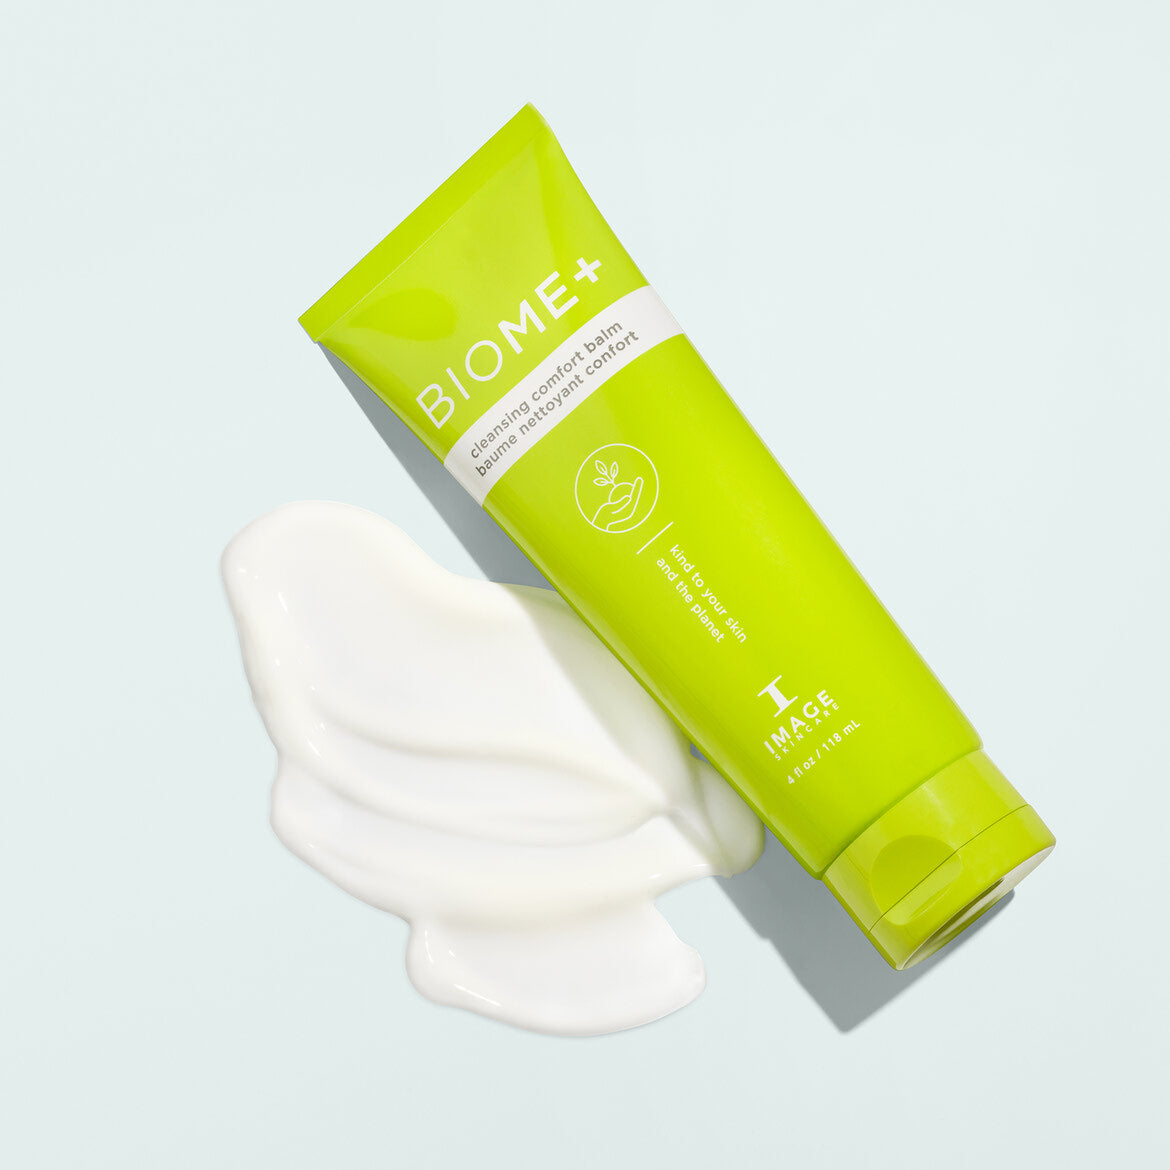 Biome + Cleansing Comfort Balm